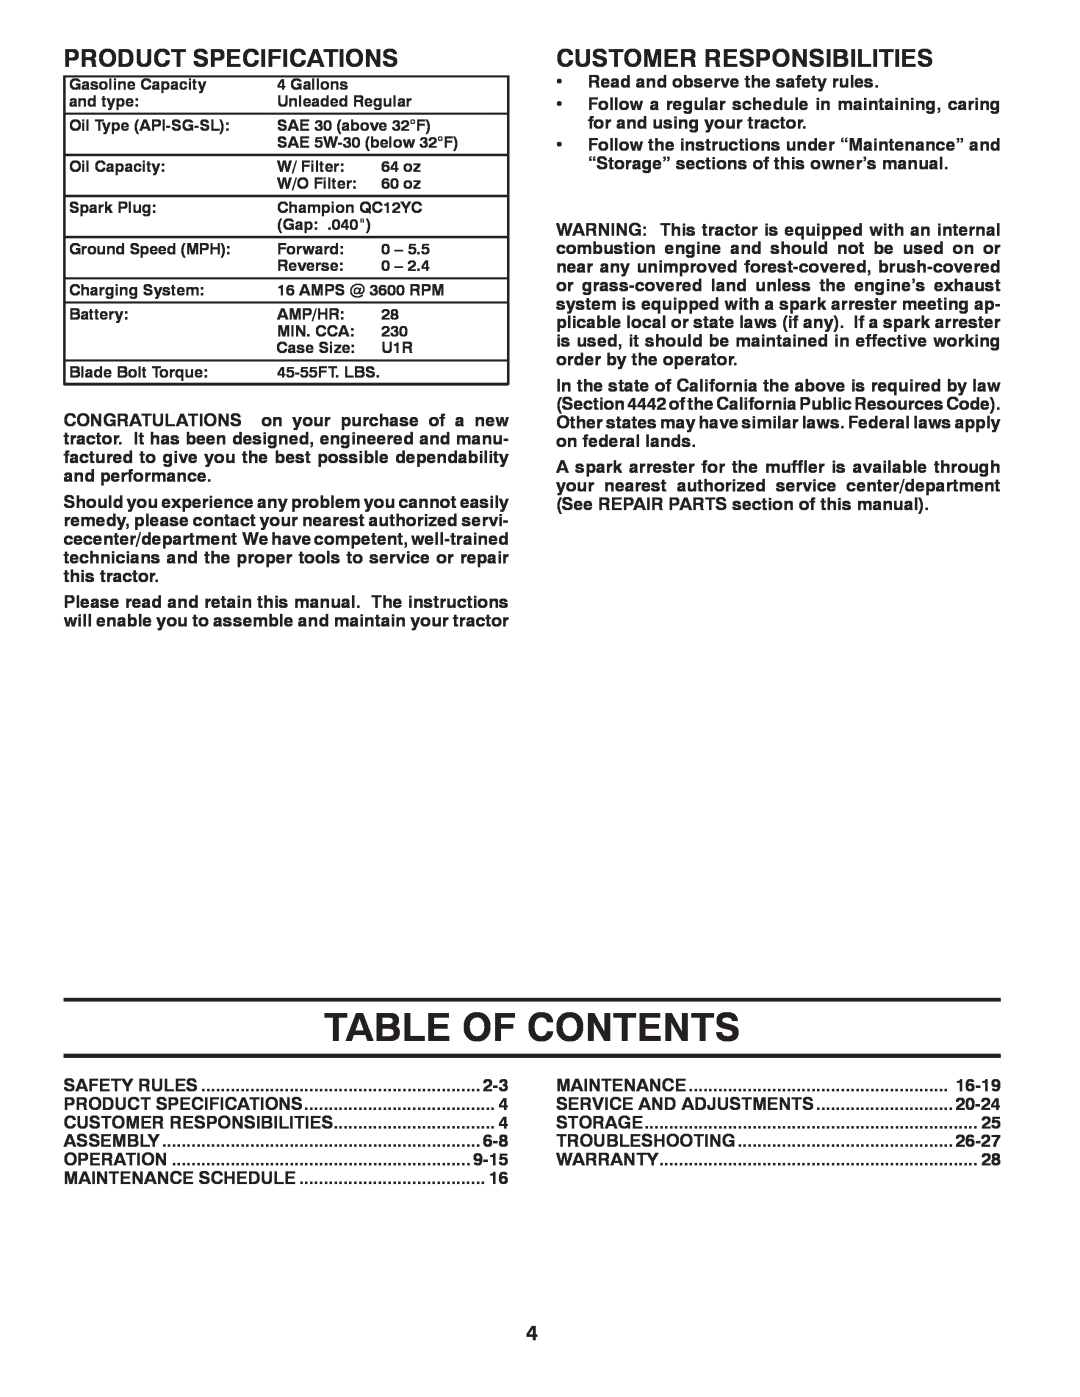 Poulan 417920 manual Table Of Contents, Product Specifications, Customer Responsibilities 